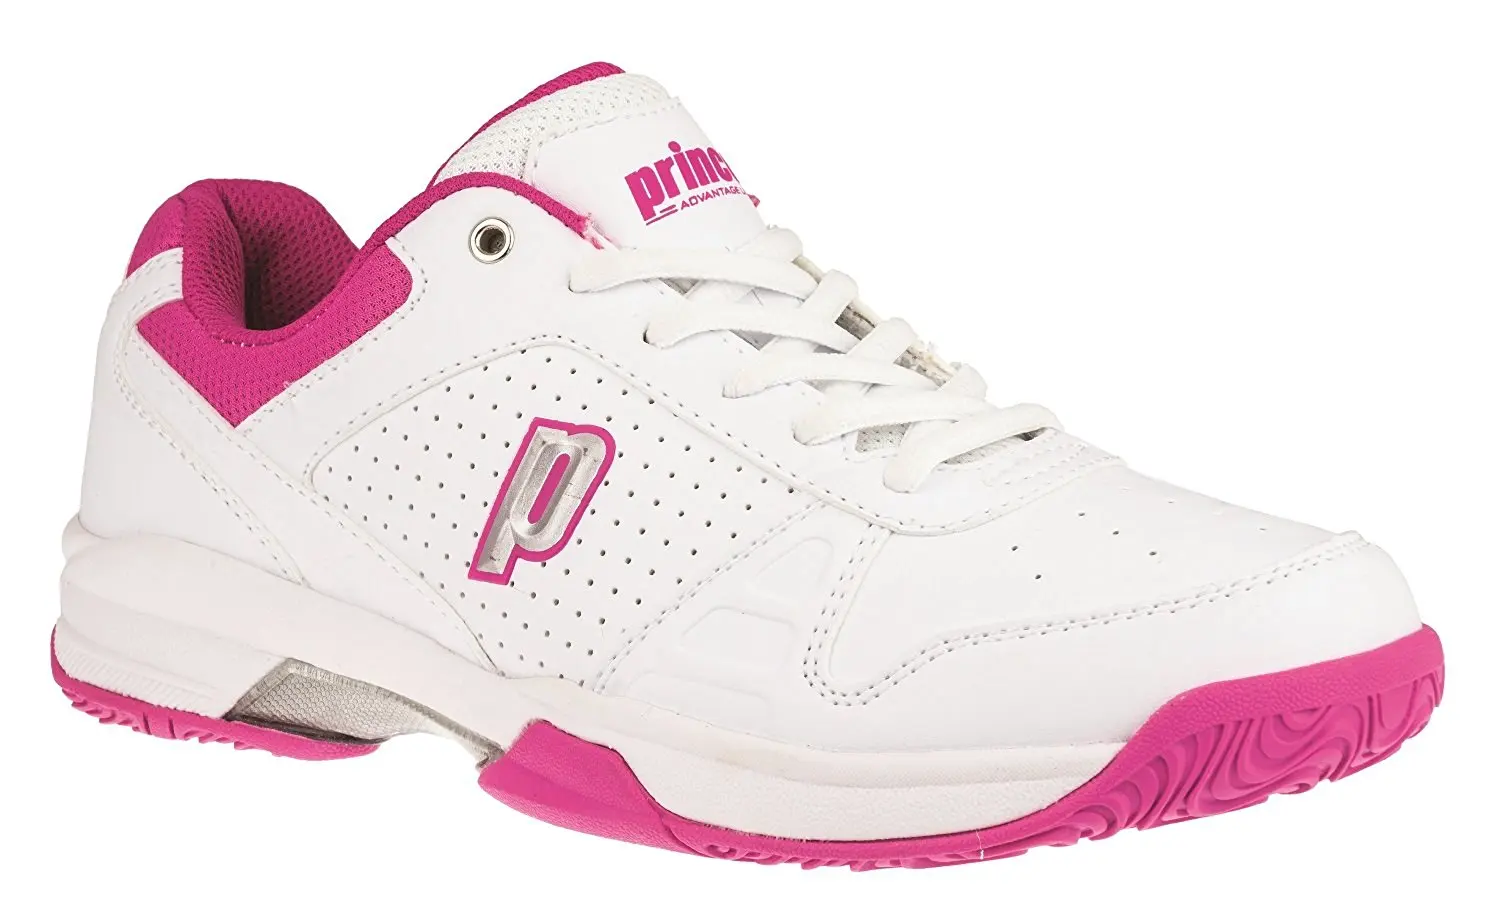 prince men's truth tennis shoes